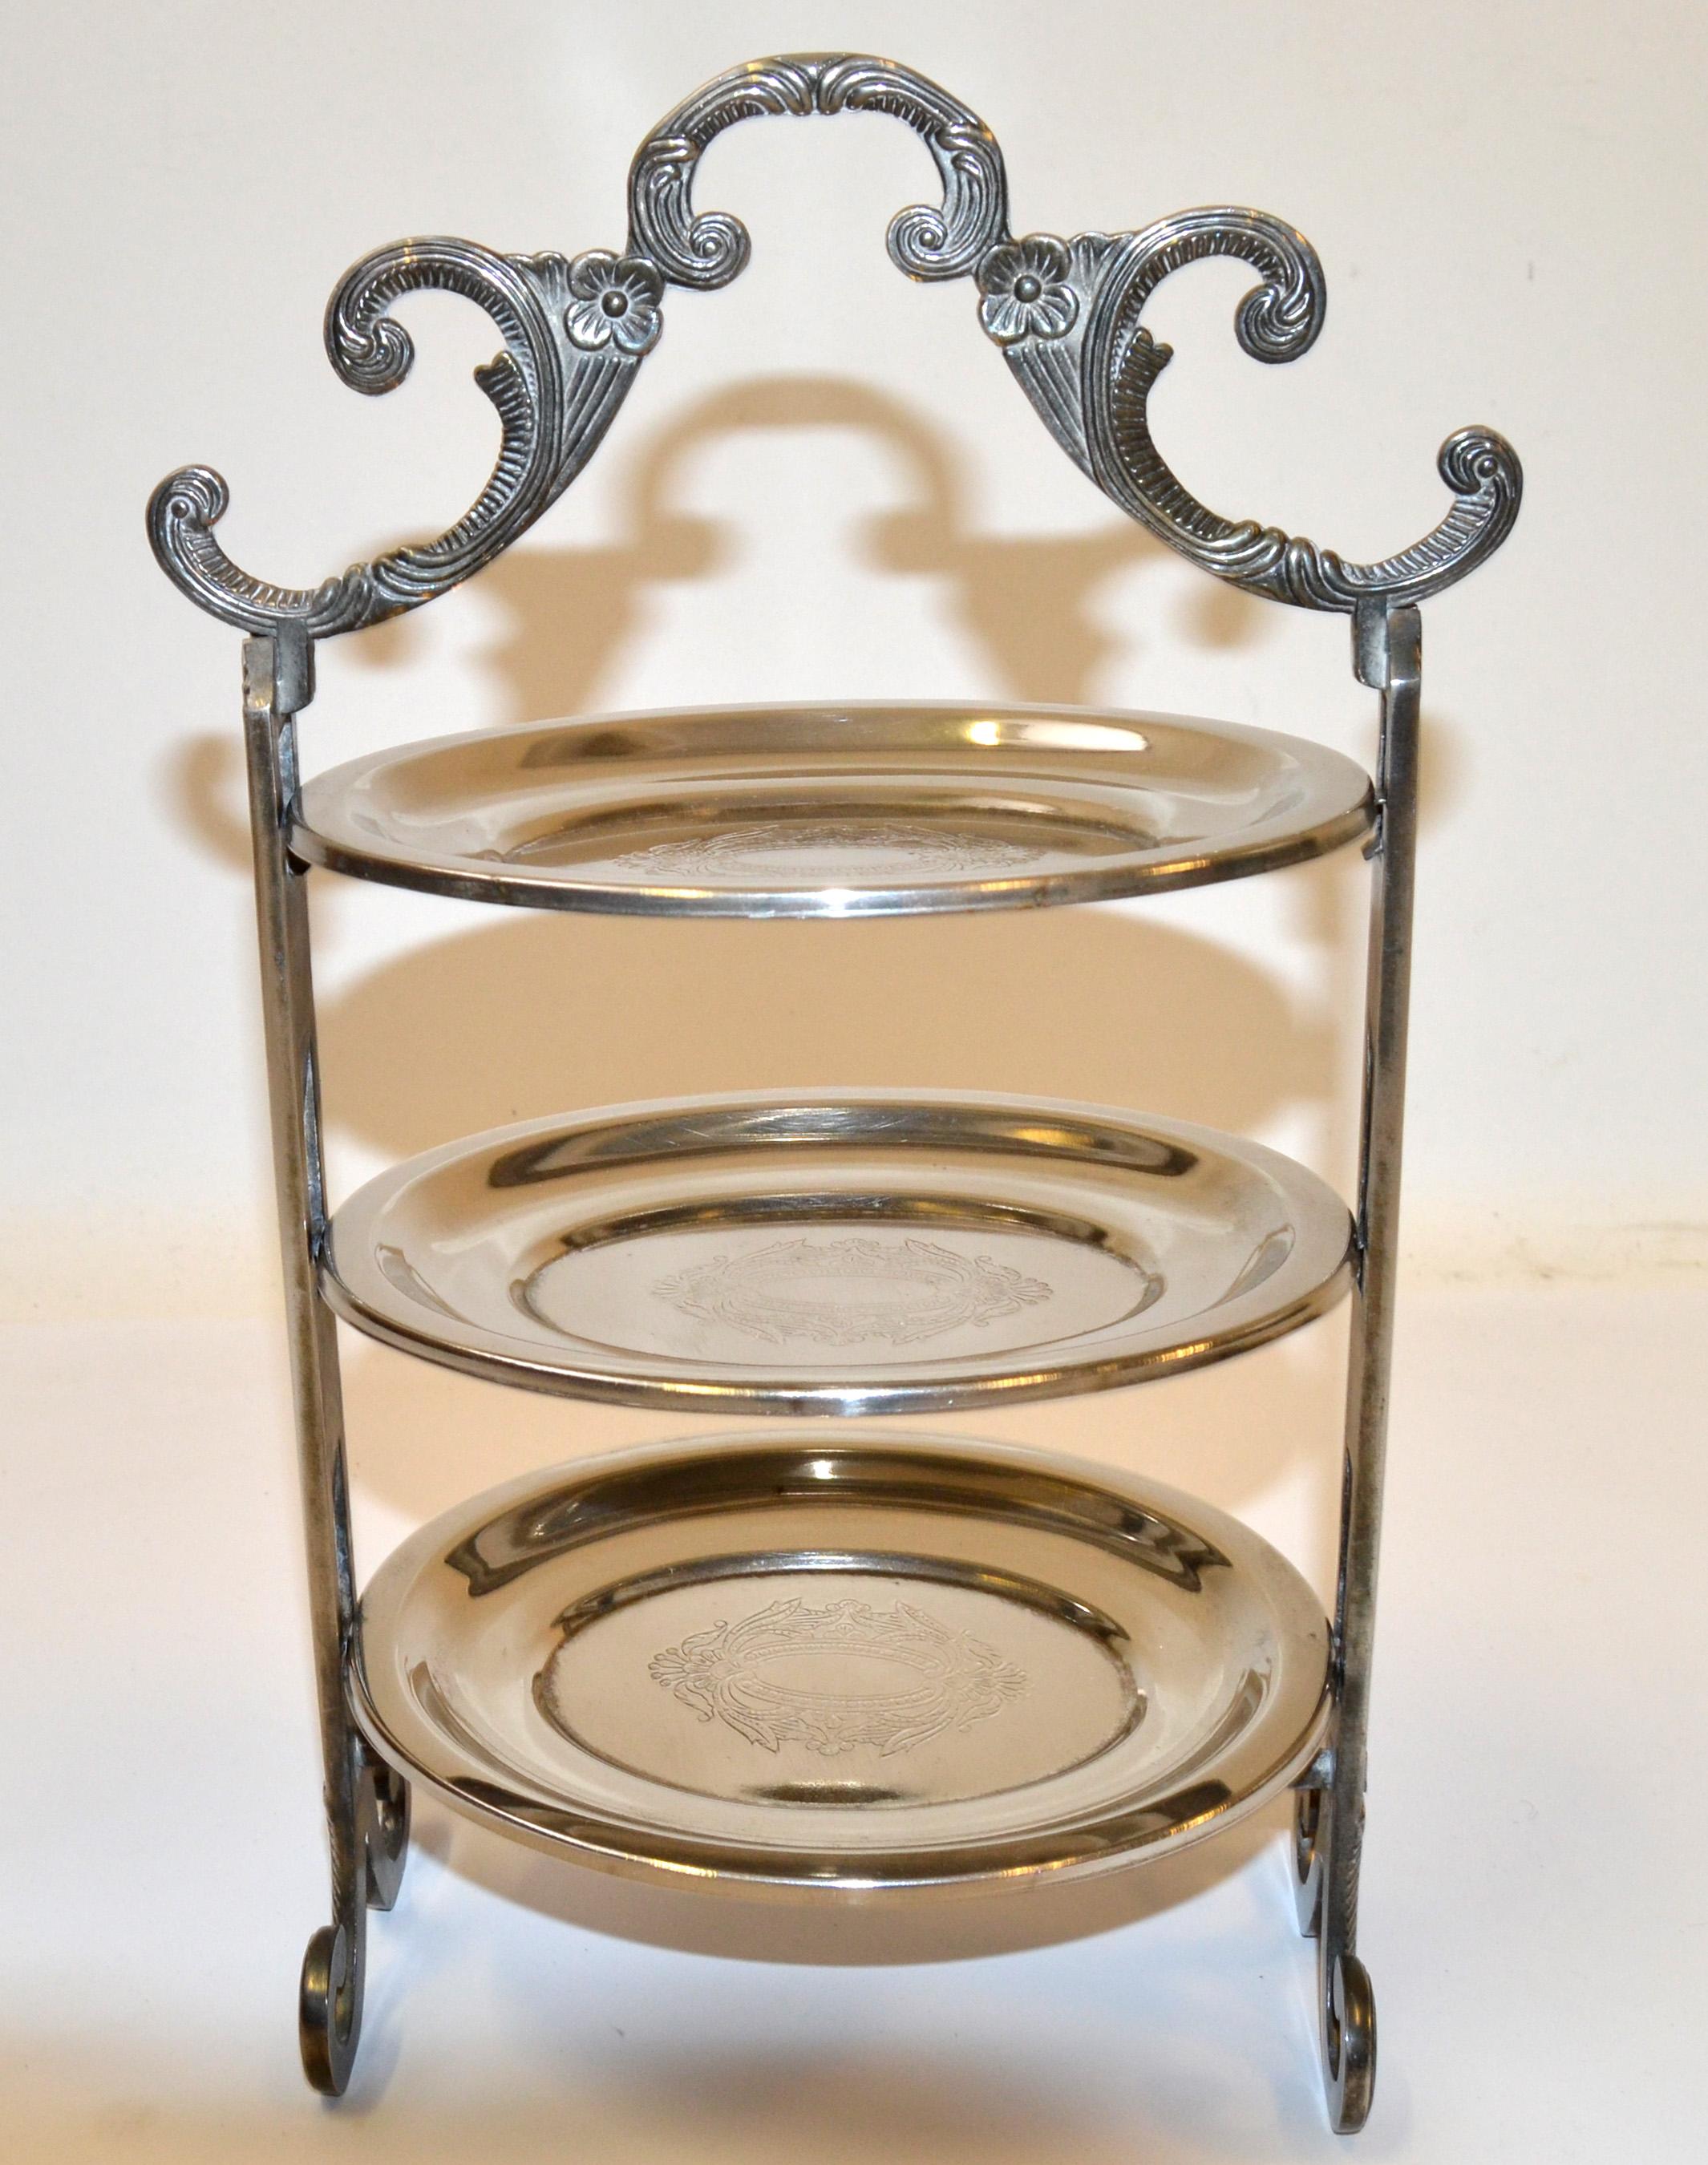 Edwardian Style Three-Tier Silver Plated Cake Stand Patisserie Stand Server Fork 1